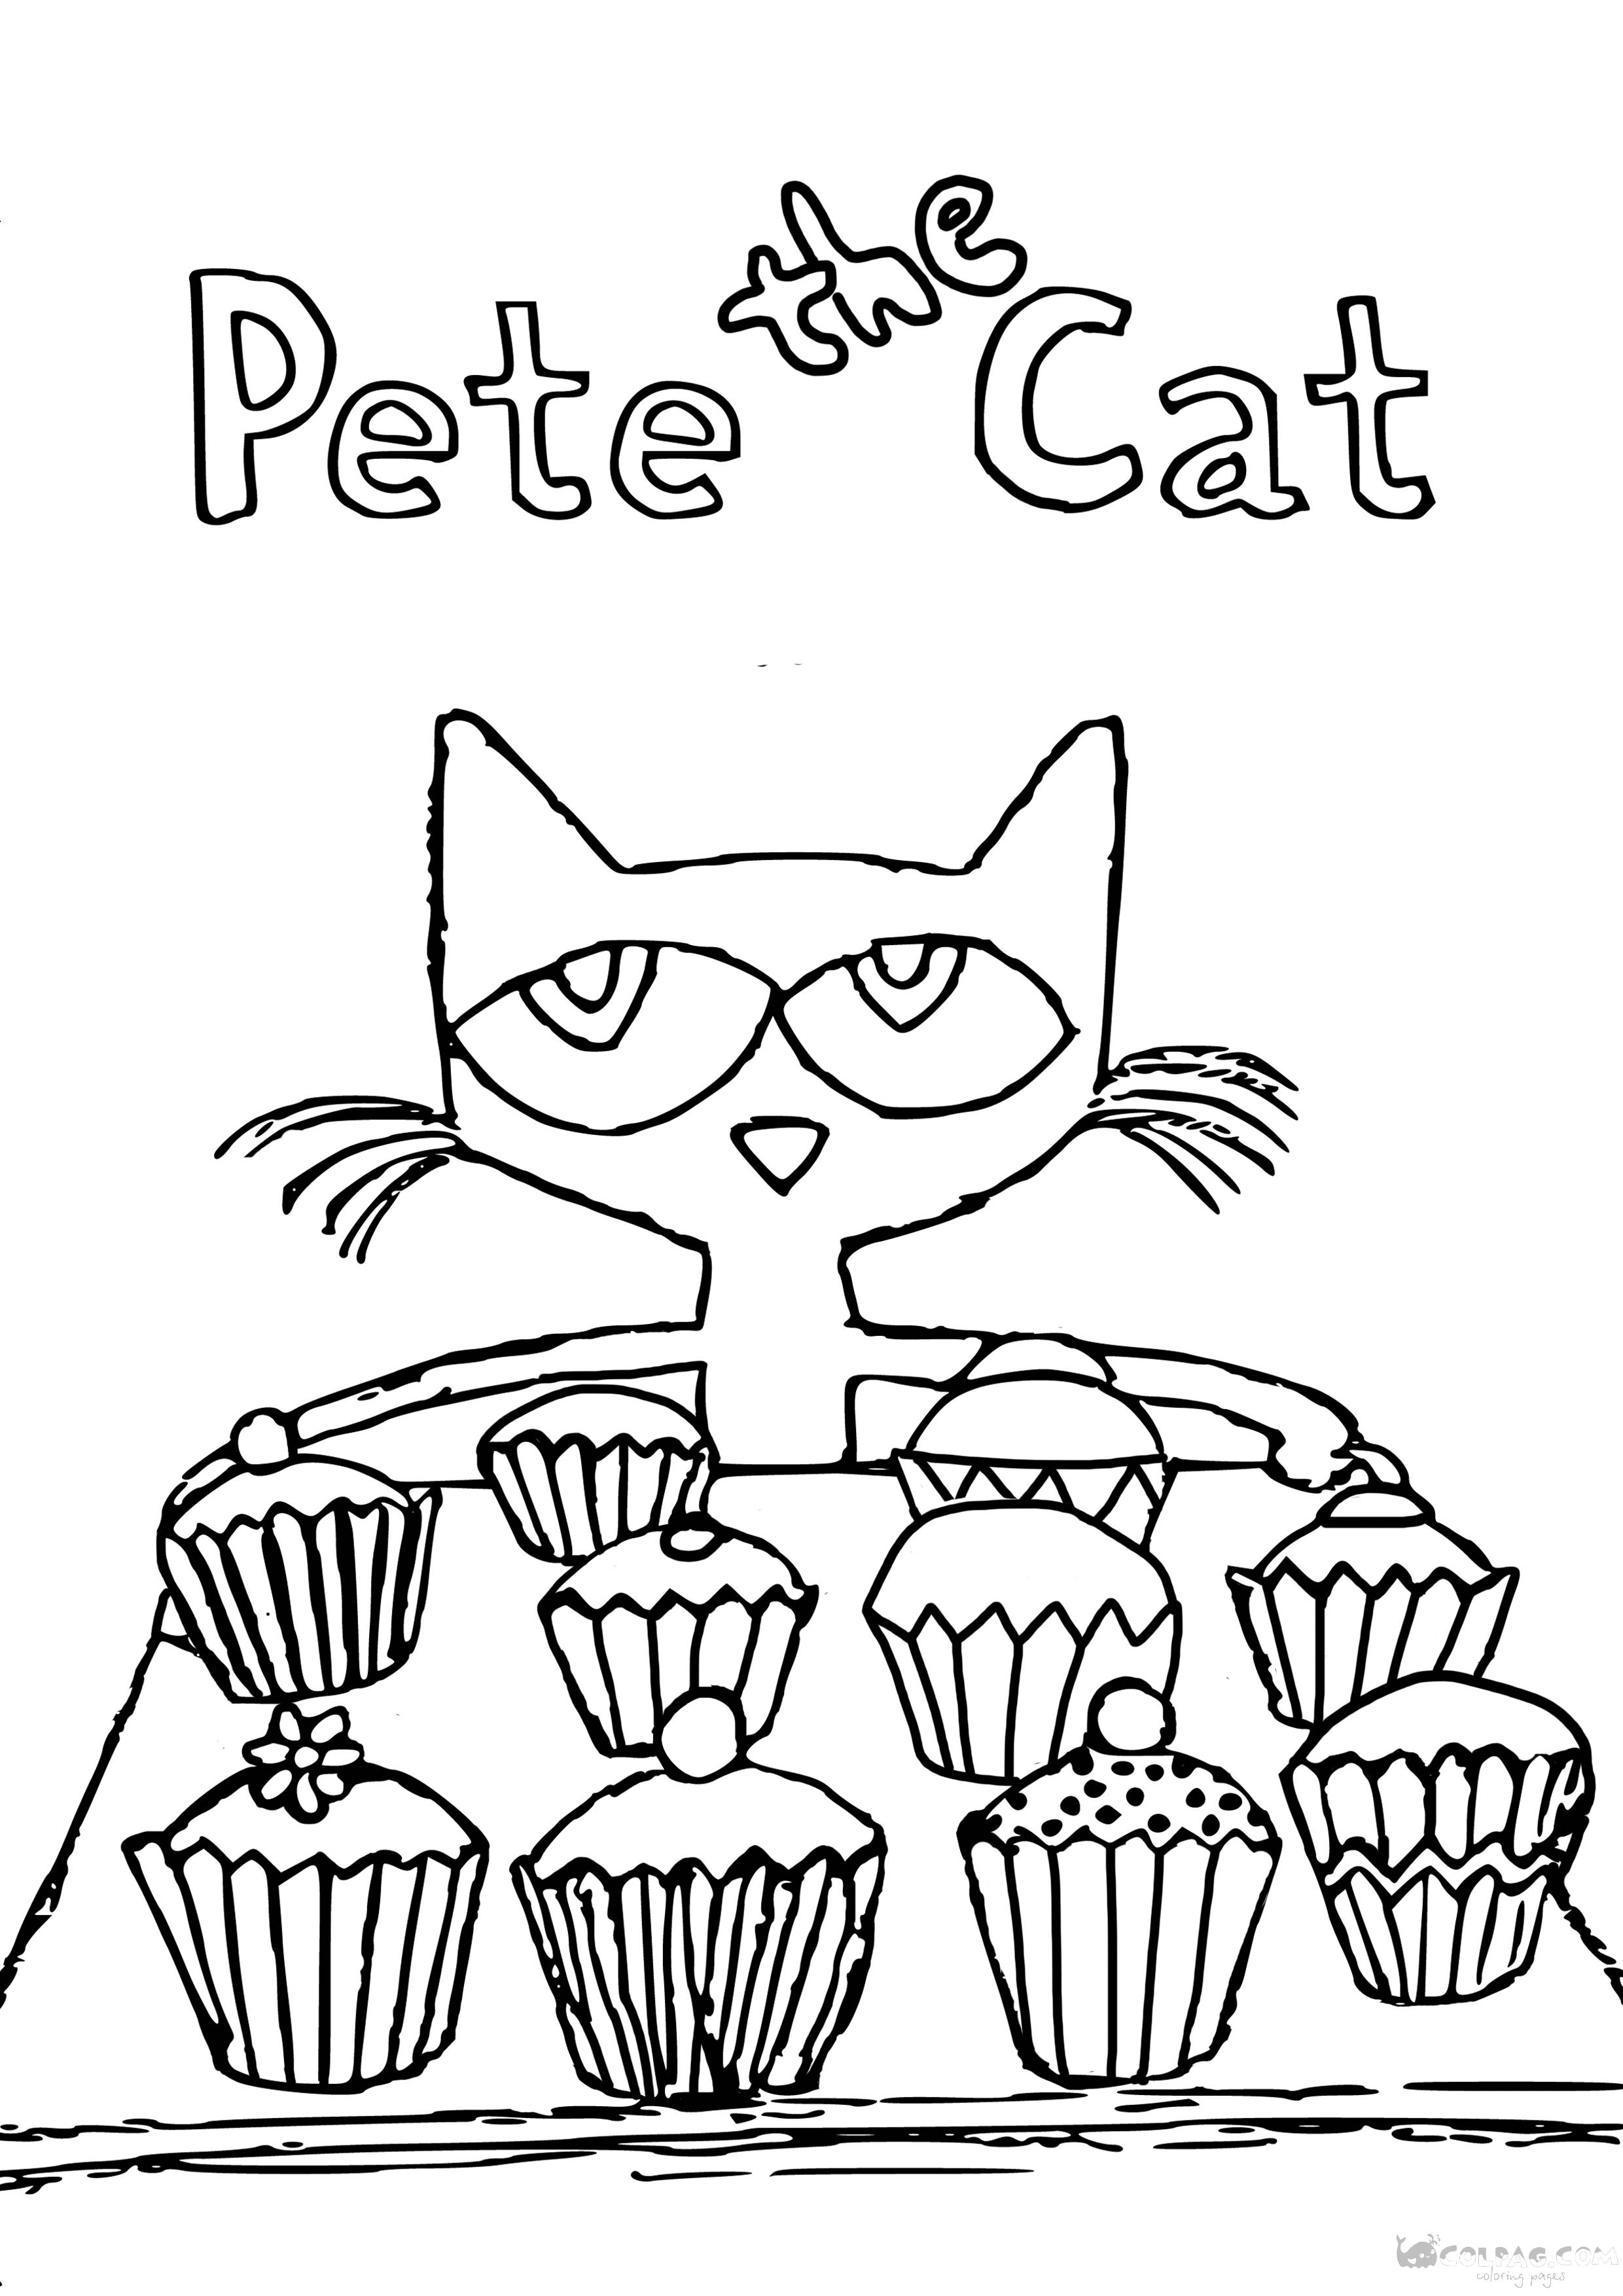 pete-the-cat-coloting-page-13-colpag